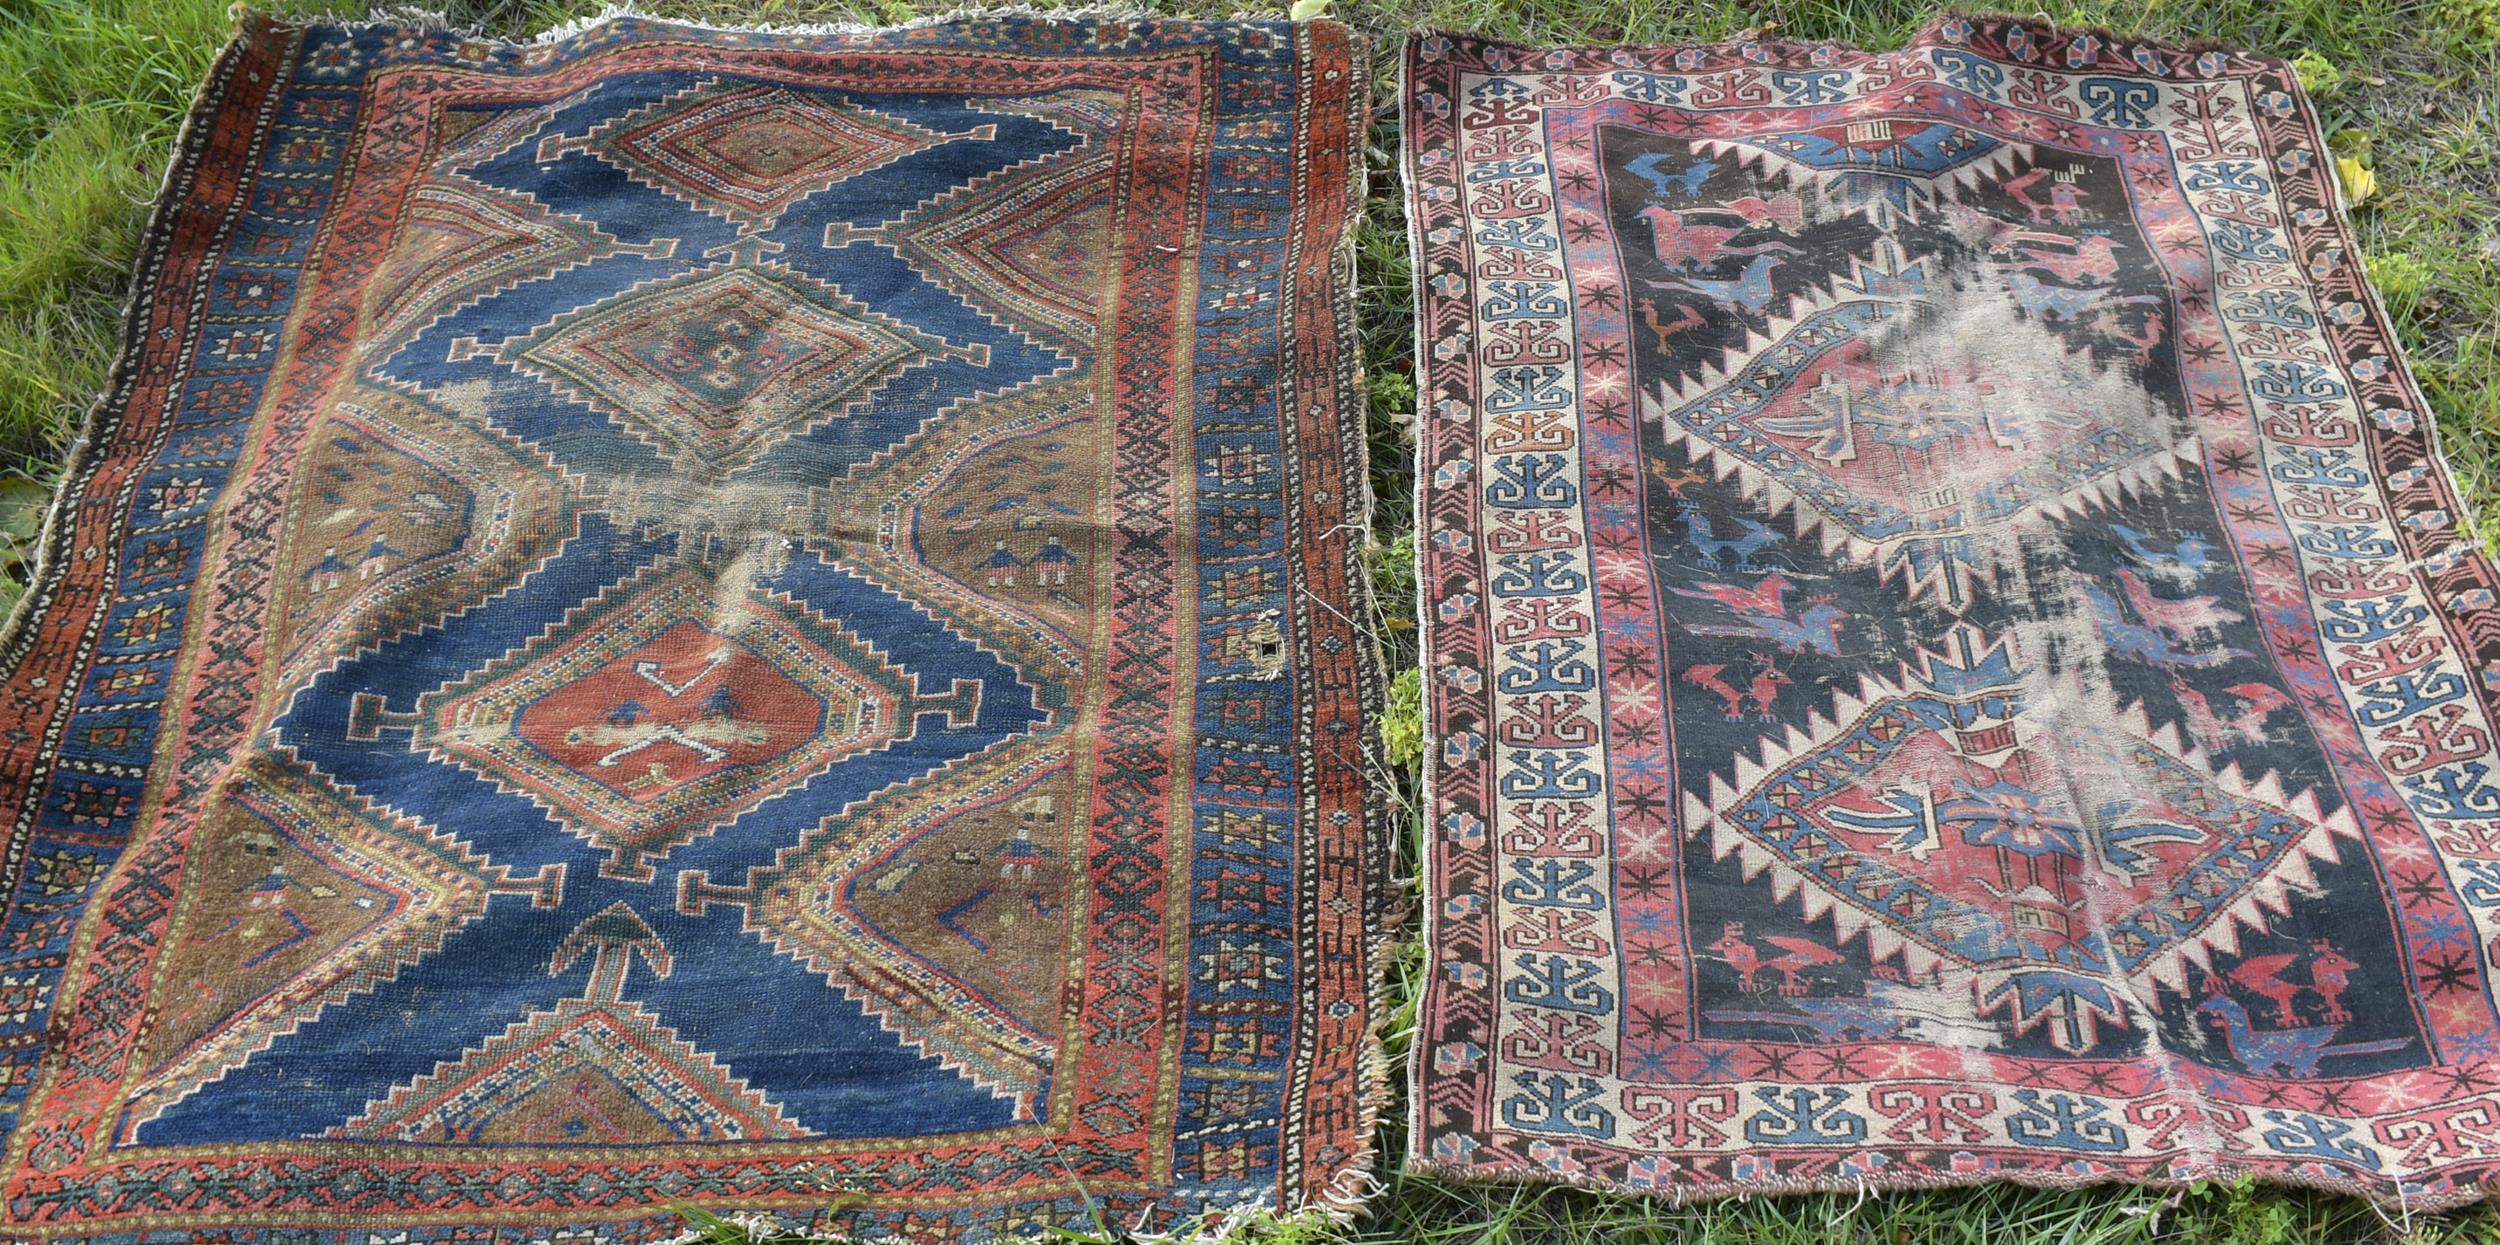 TWO WORN ANTIQUE SCATTER RUGS  29e26e